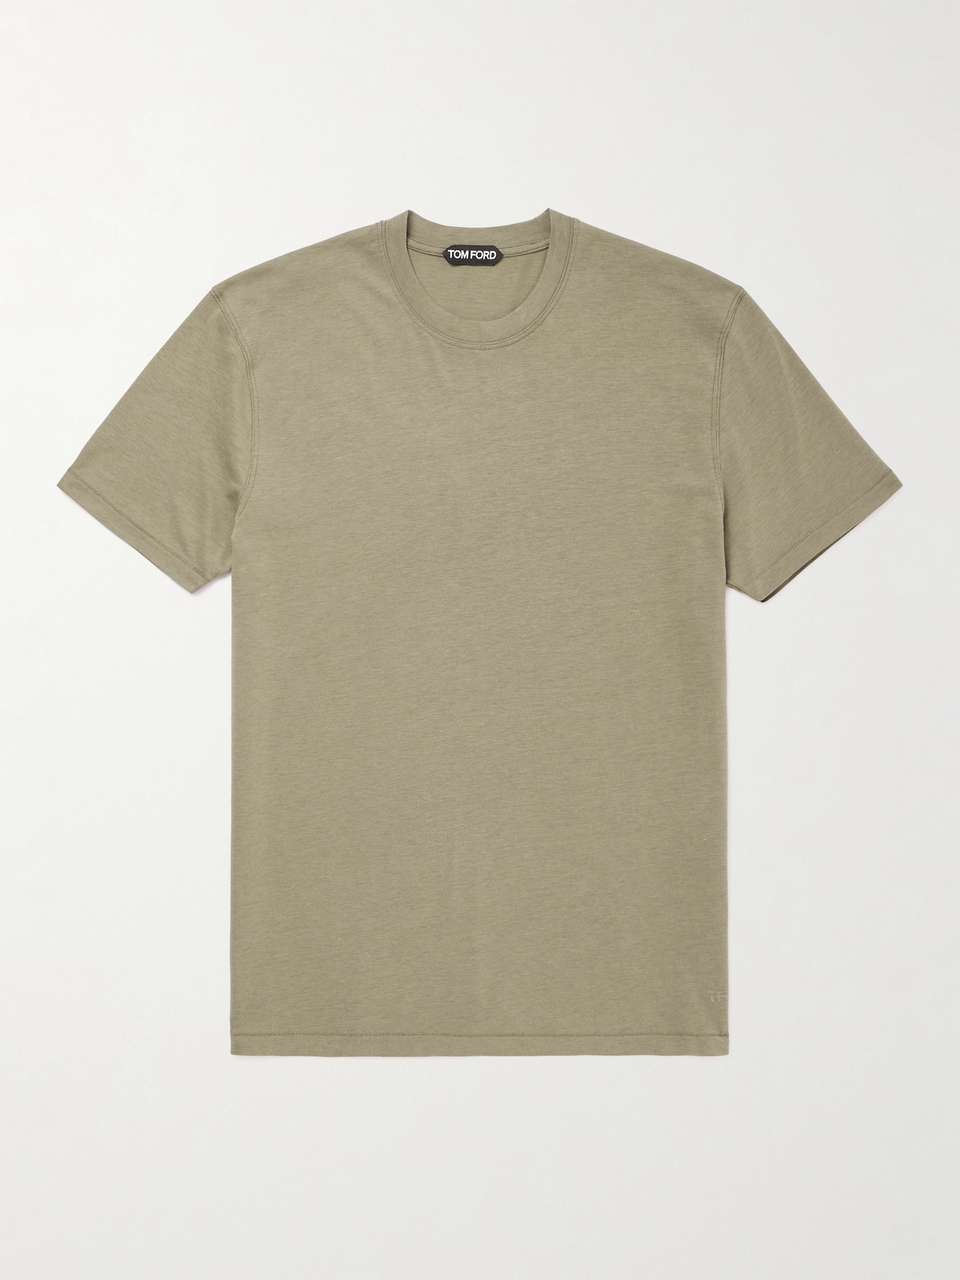 TOM FORD Slim-Fit Lyocell and Cotton-Blend Jersey T-Shirt for Men | MR ...